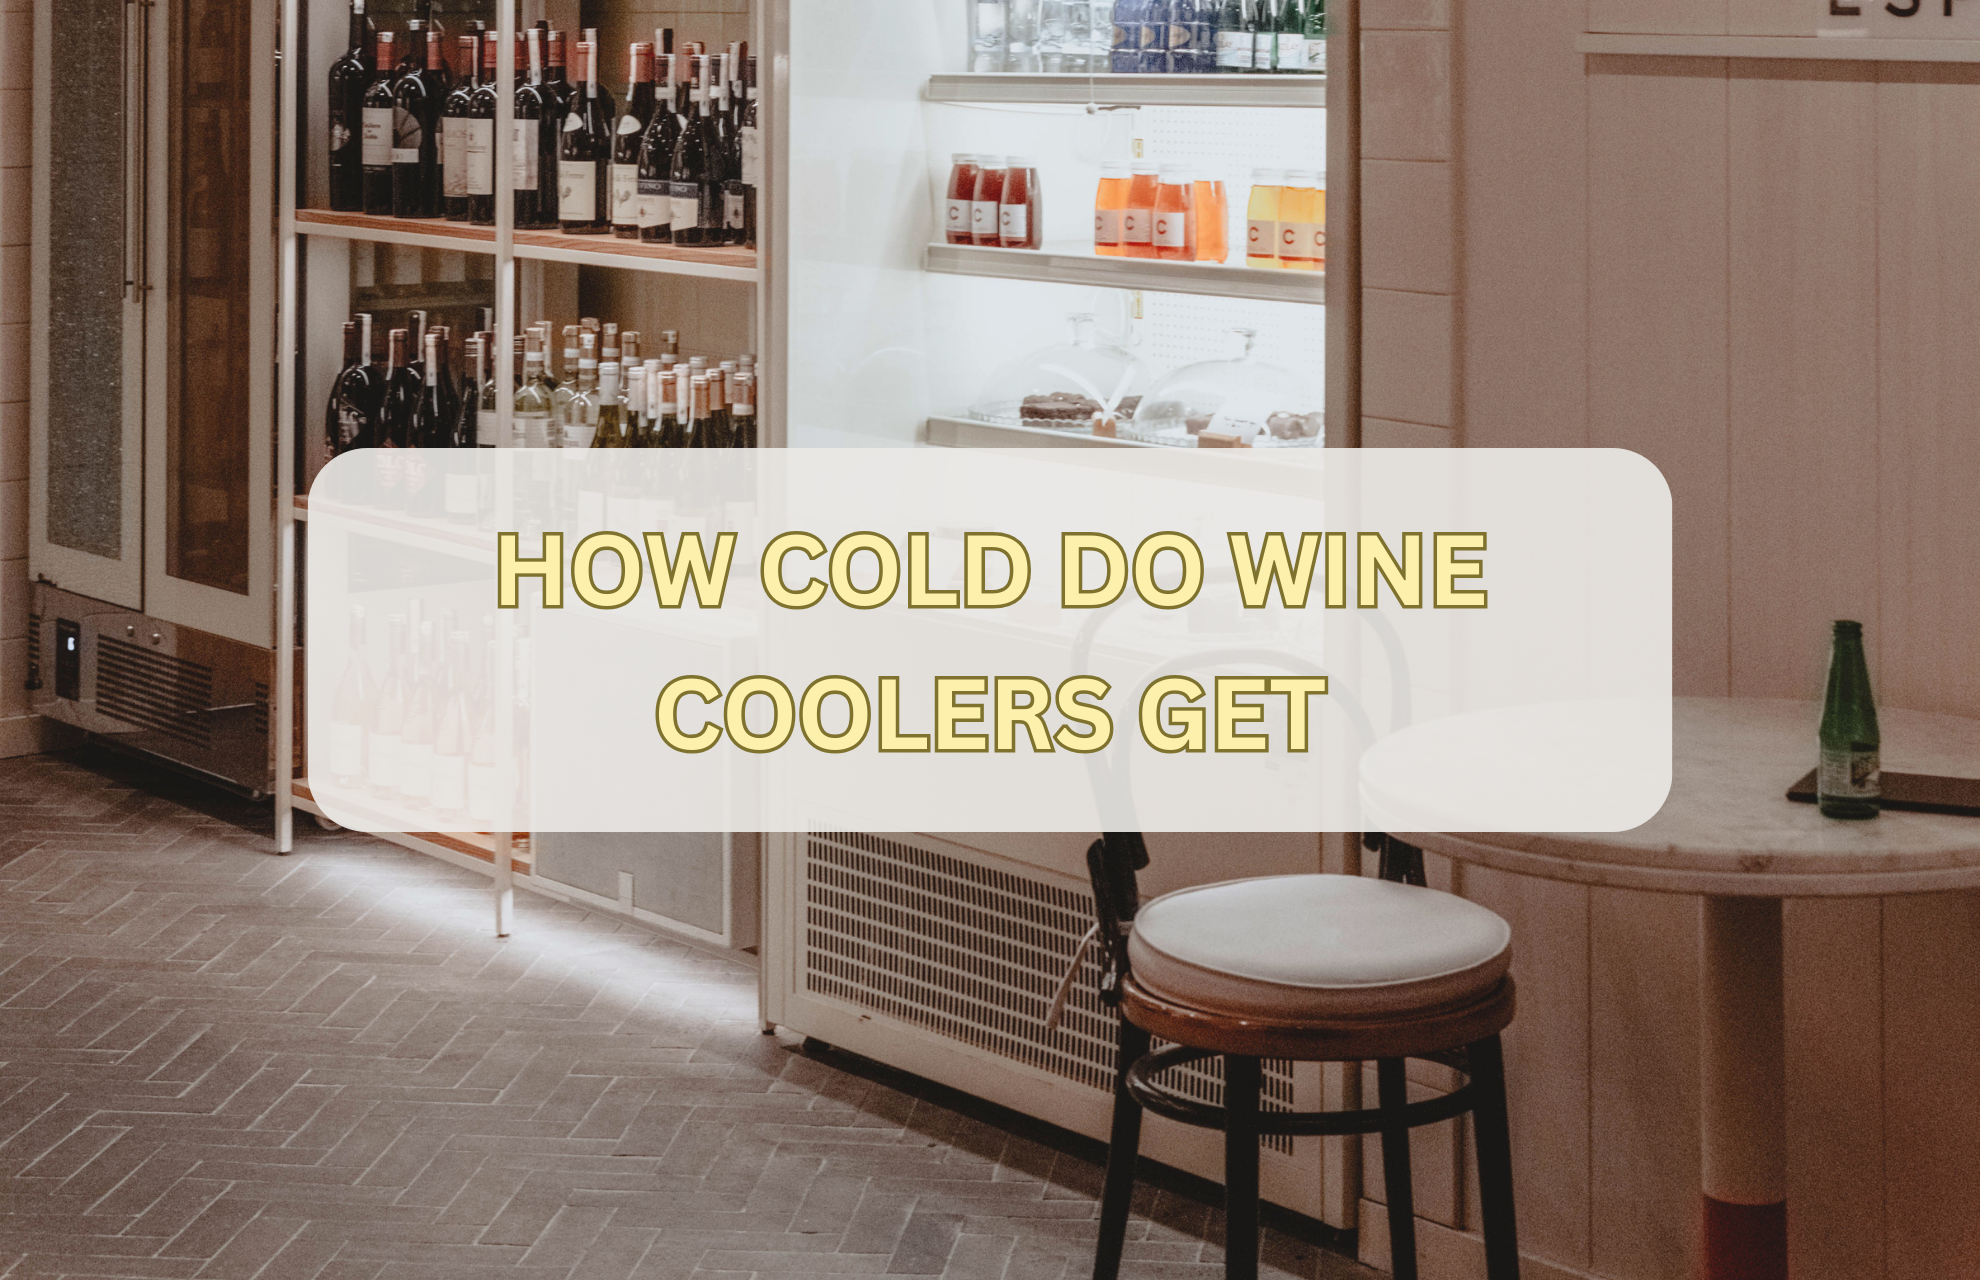 HOW COLD DO WINE COOLERS GET